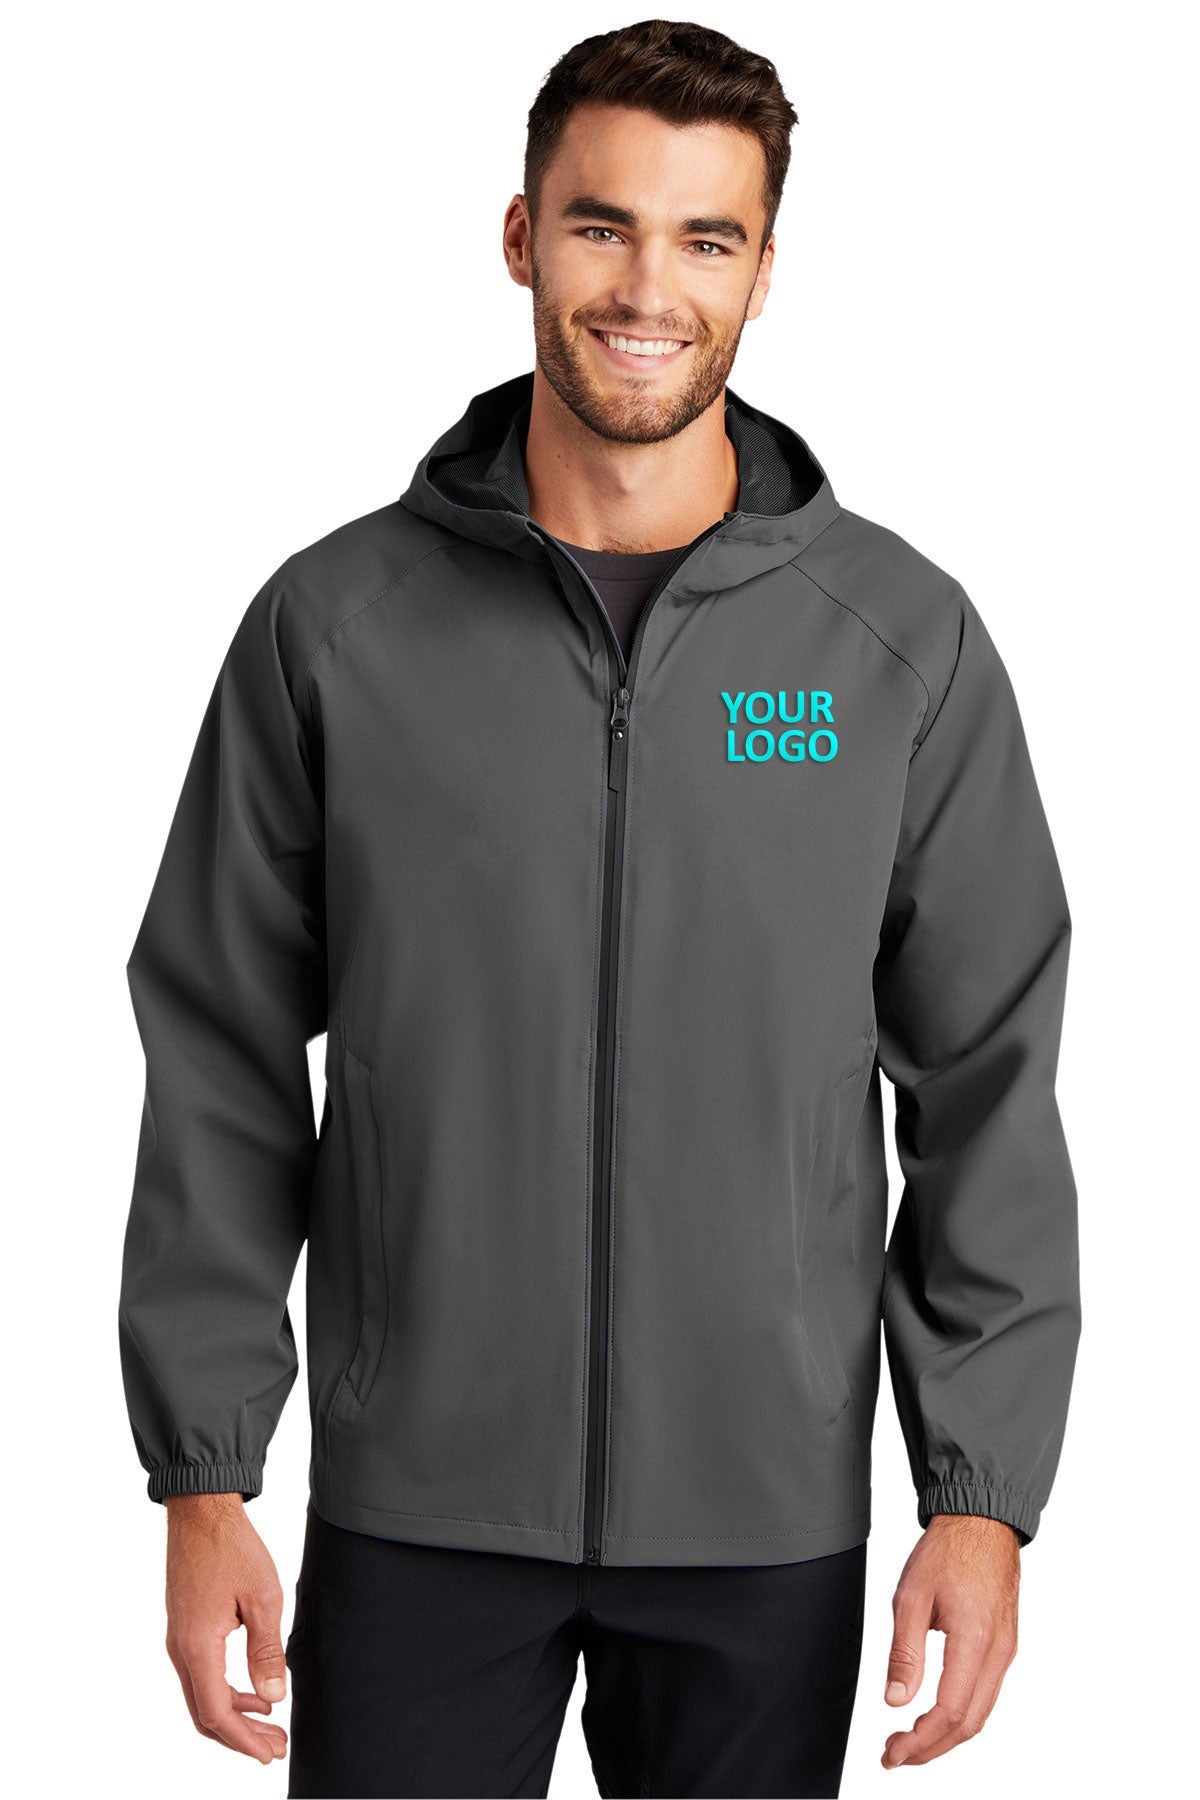 Promotional Jackets | Branded Jackets Printed With Your Logo | Embroidered  Jackets | Eco-Friendly & Sustainable Promotional Products UK | PROMOBRAND  :: Promotional Products UK | Branded Products Swag Boxes & Merchandise